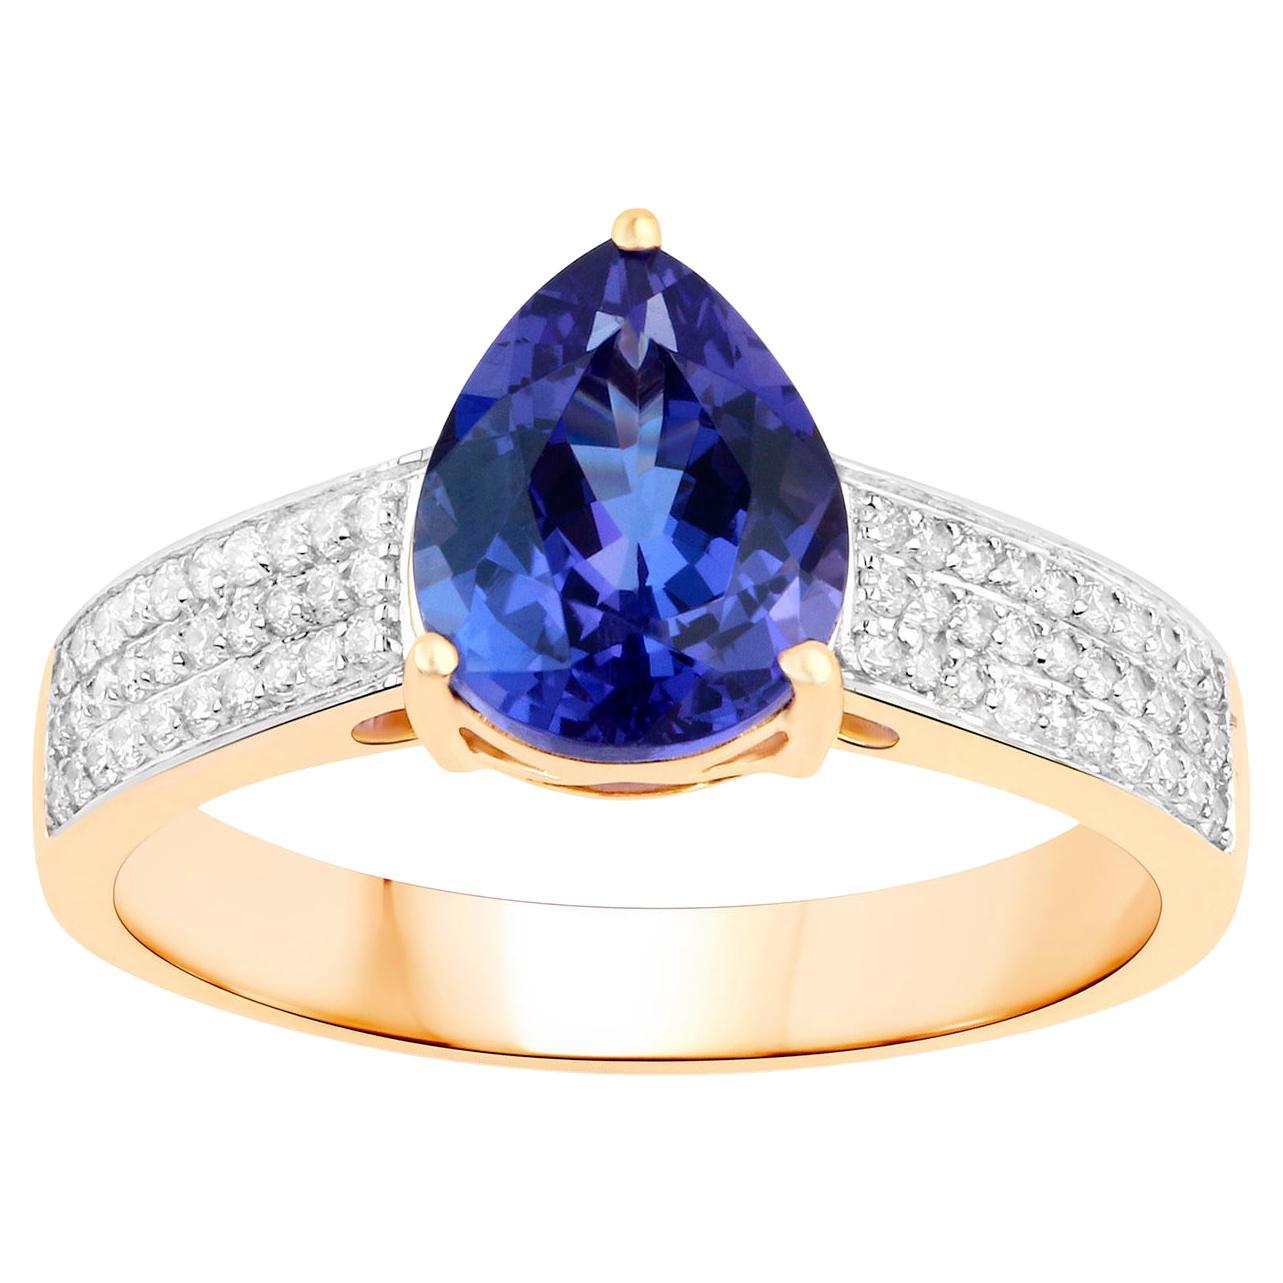 Tanzanite Ring With Diamonds 2.41 Carats 14K Yellow Gold For Sale